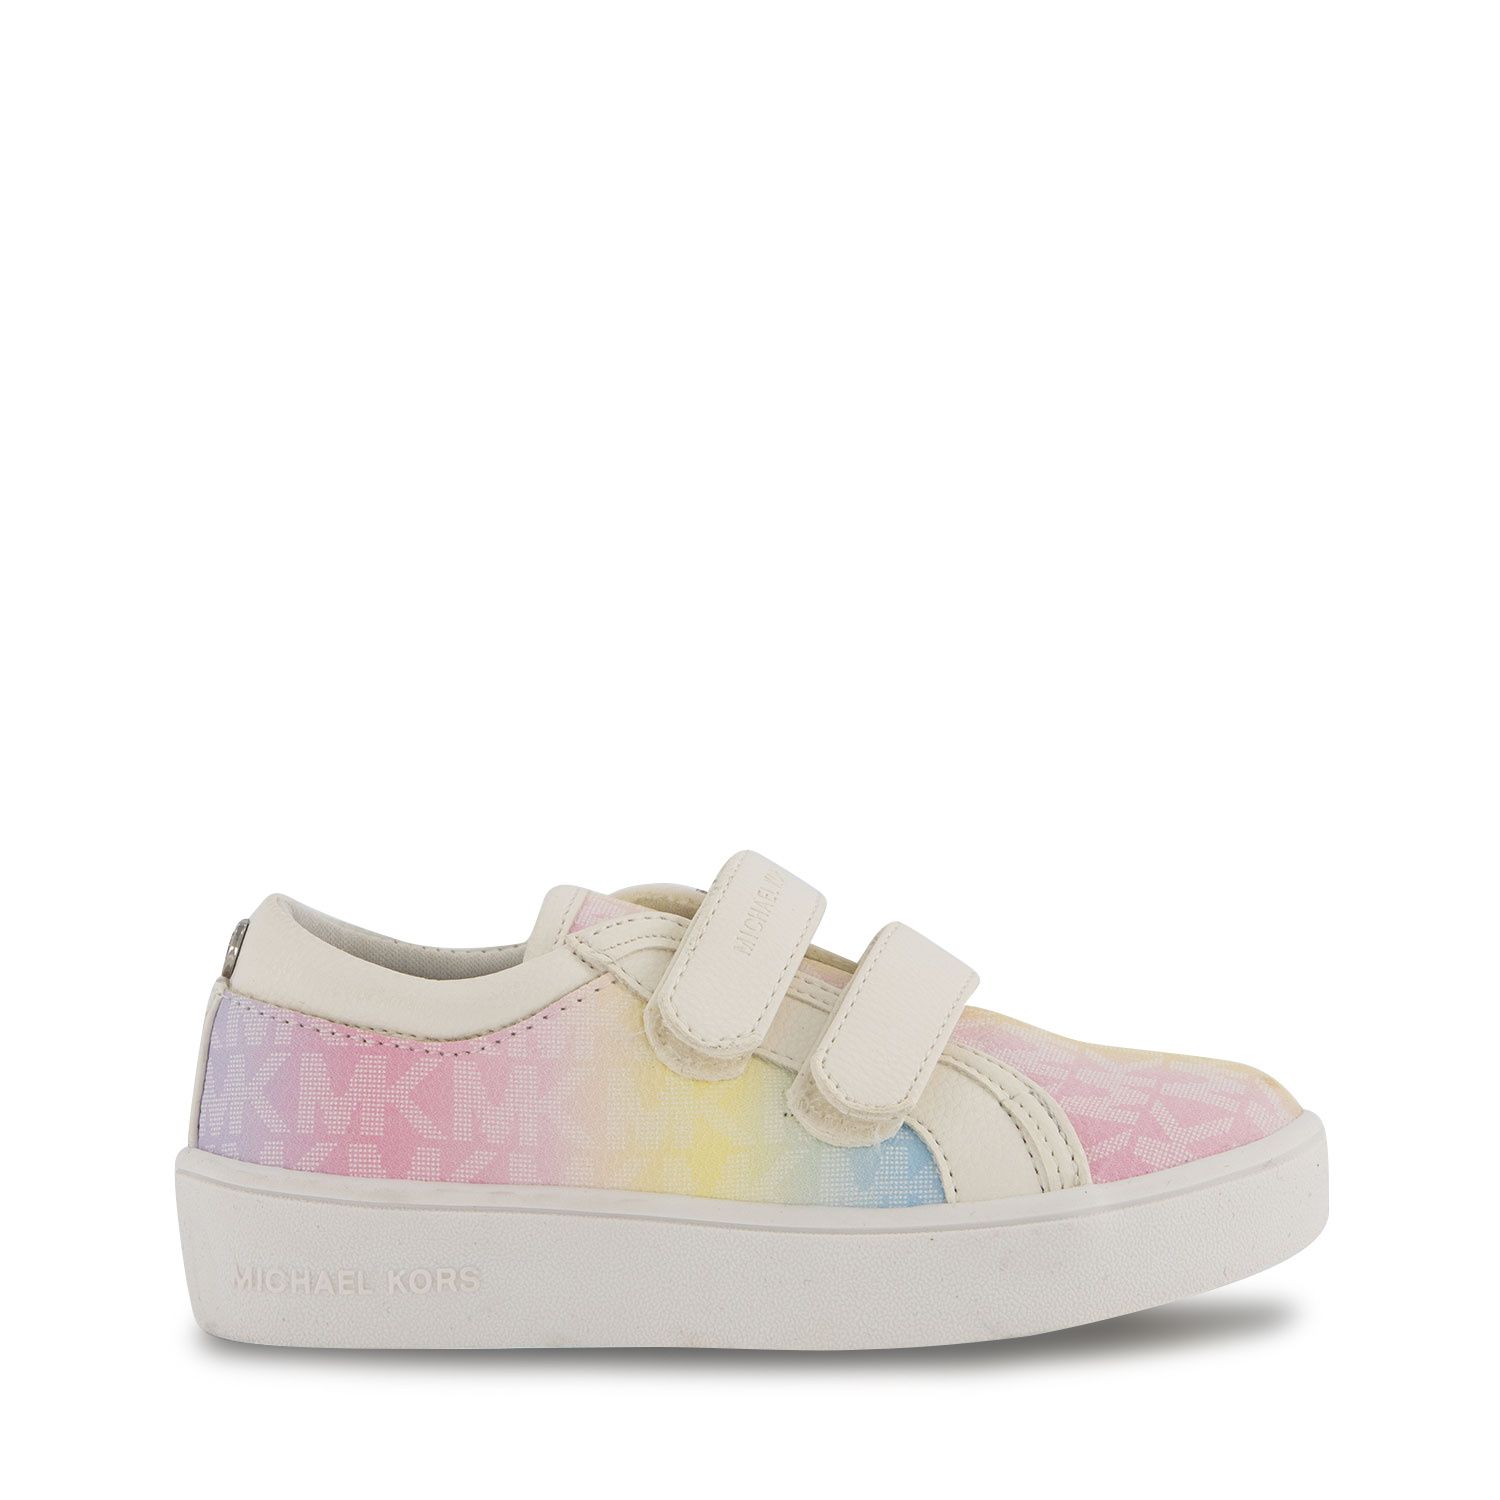 Picture of Michael Kors JEM MIRACLE HL kids sneakers light pink